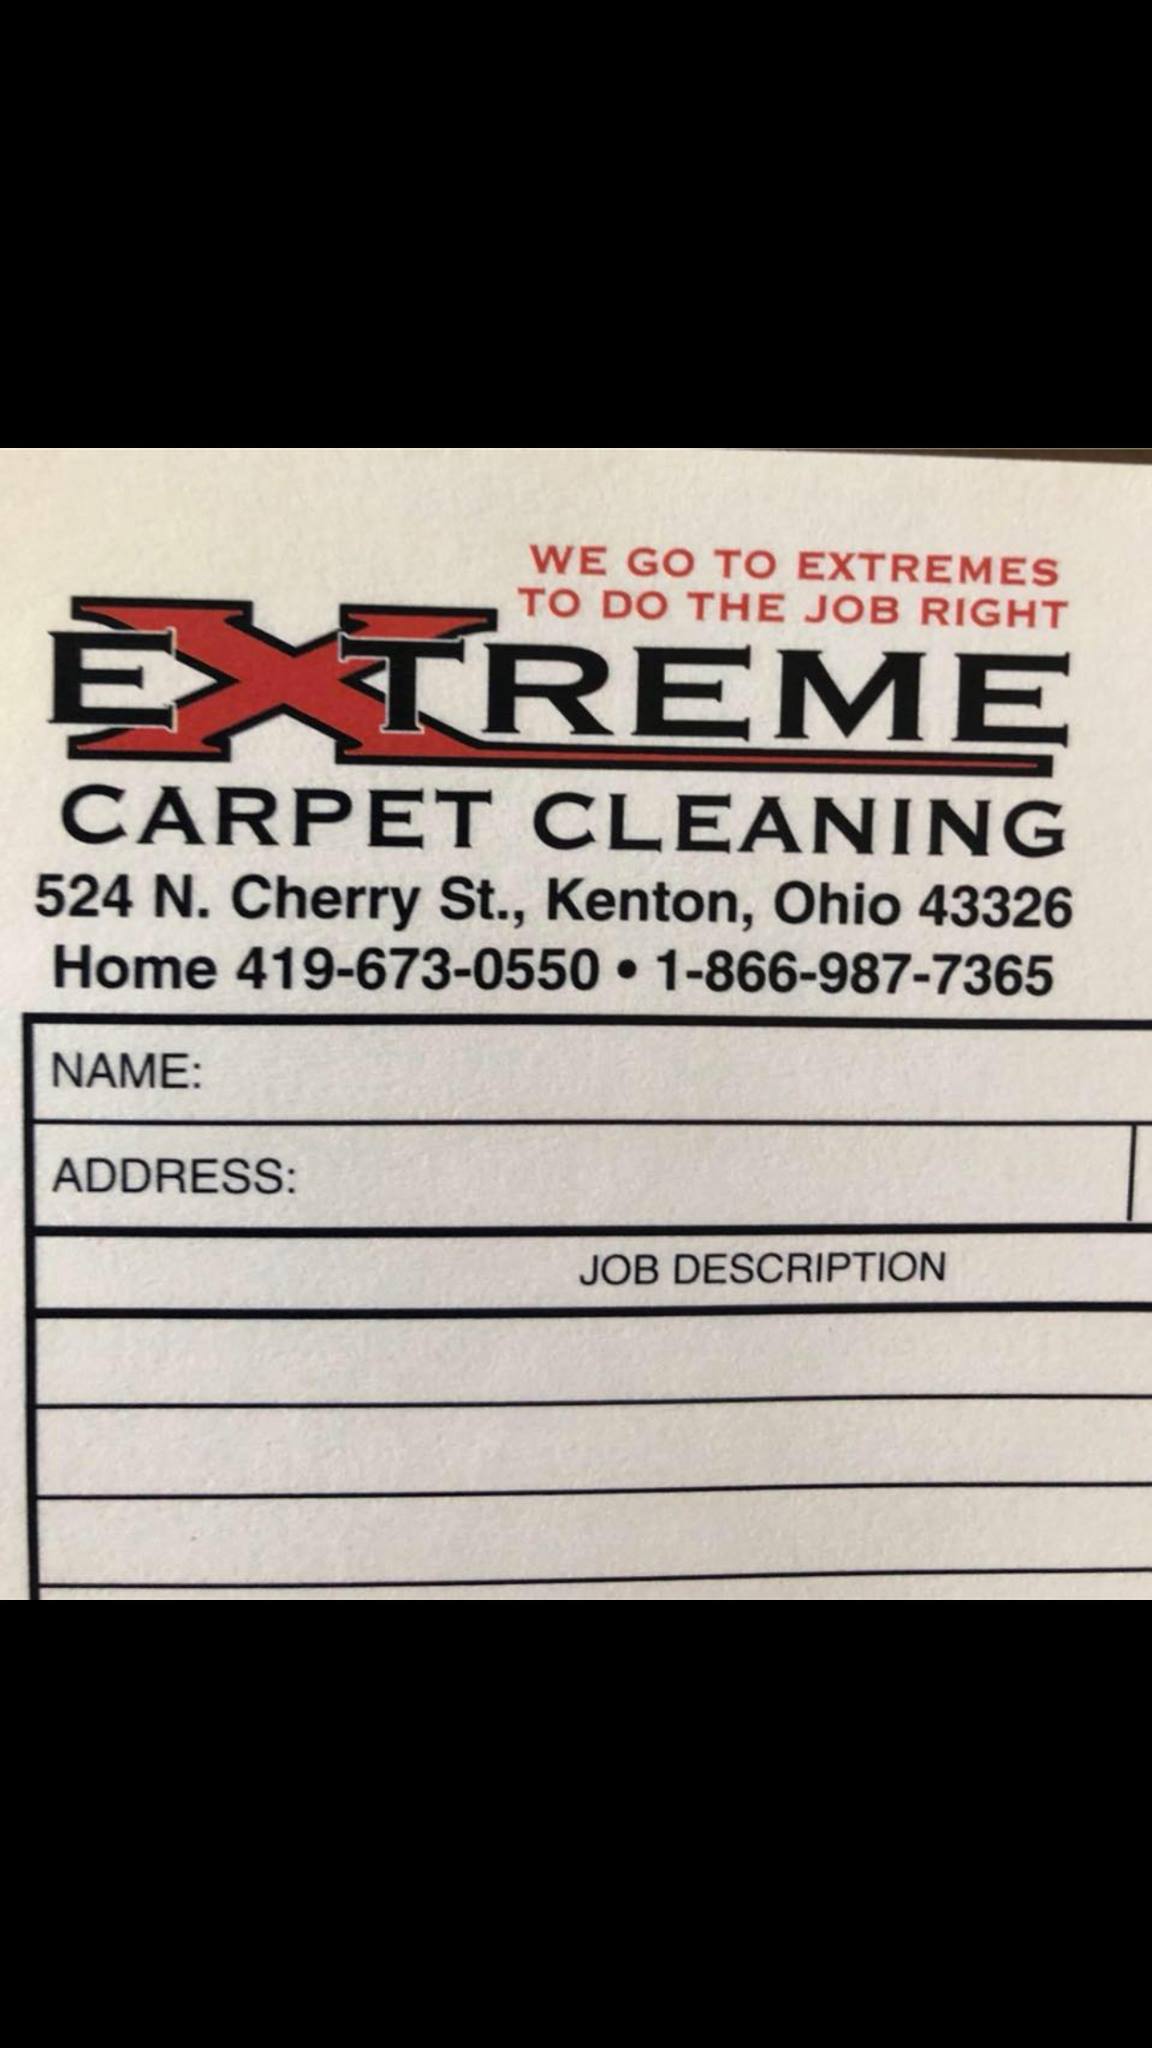 Xtreme Carpet Cleaning Co. 441 Lincoln Ave, Georgetown Ohio 45121